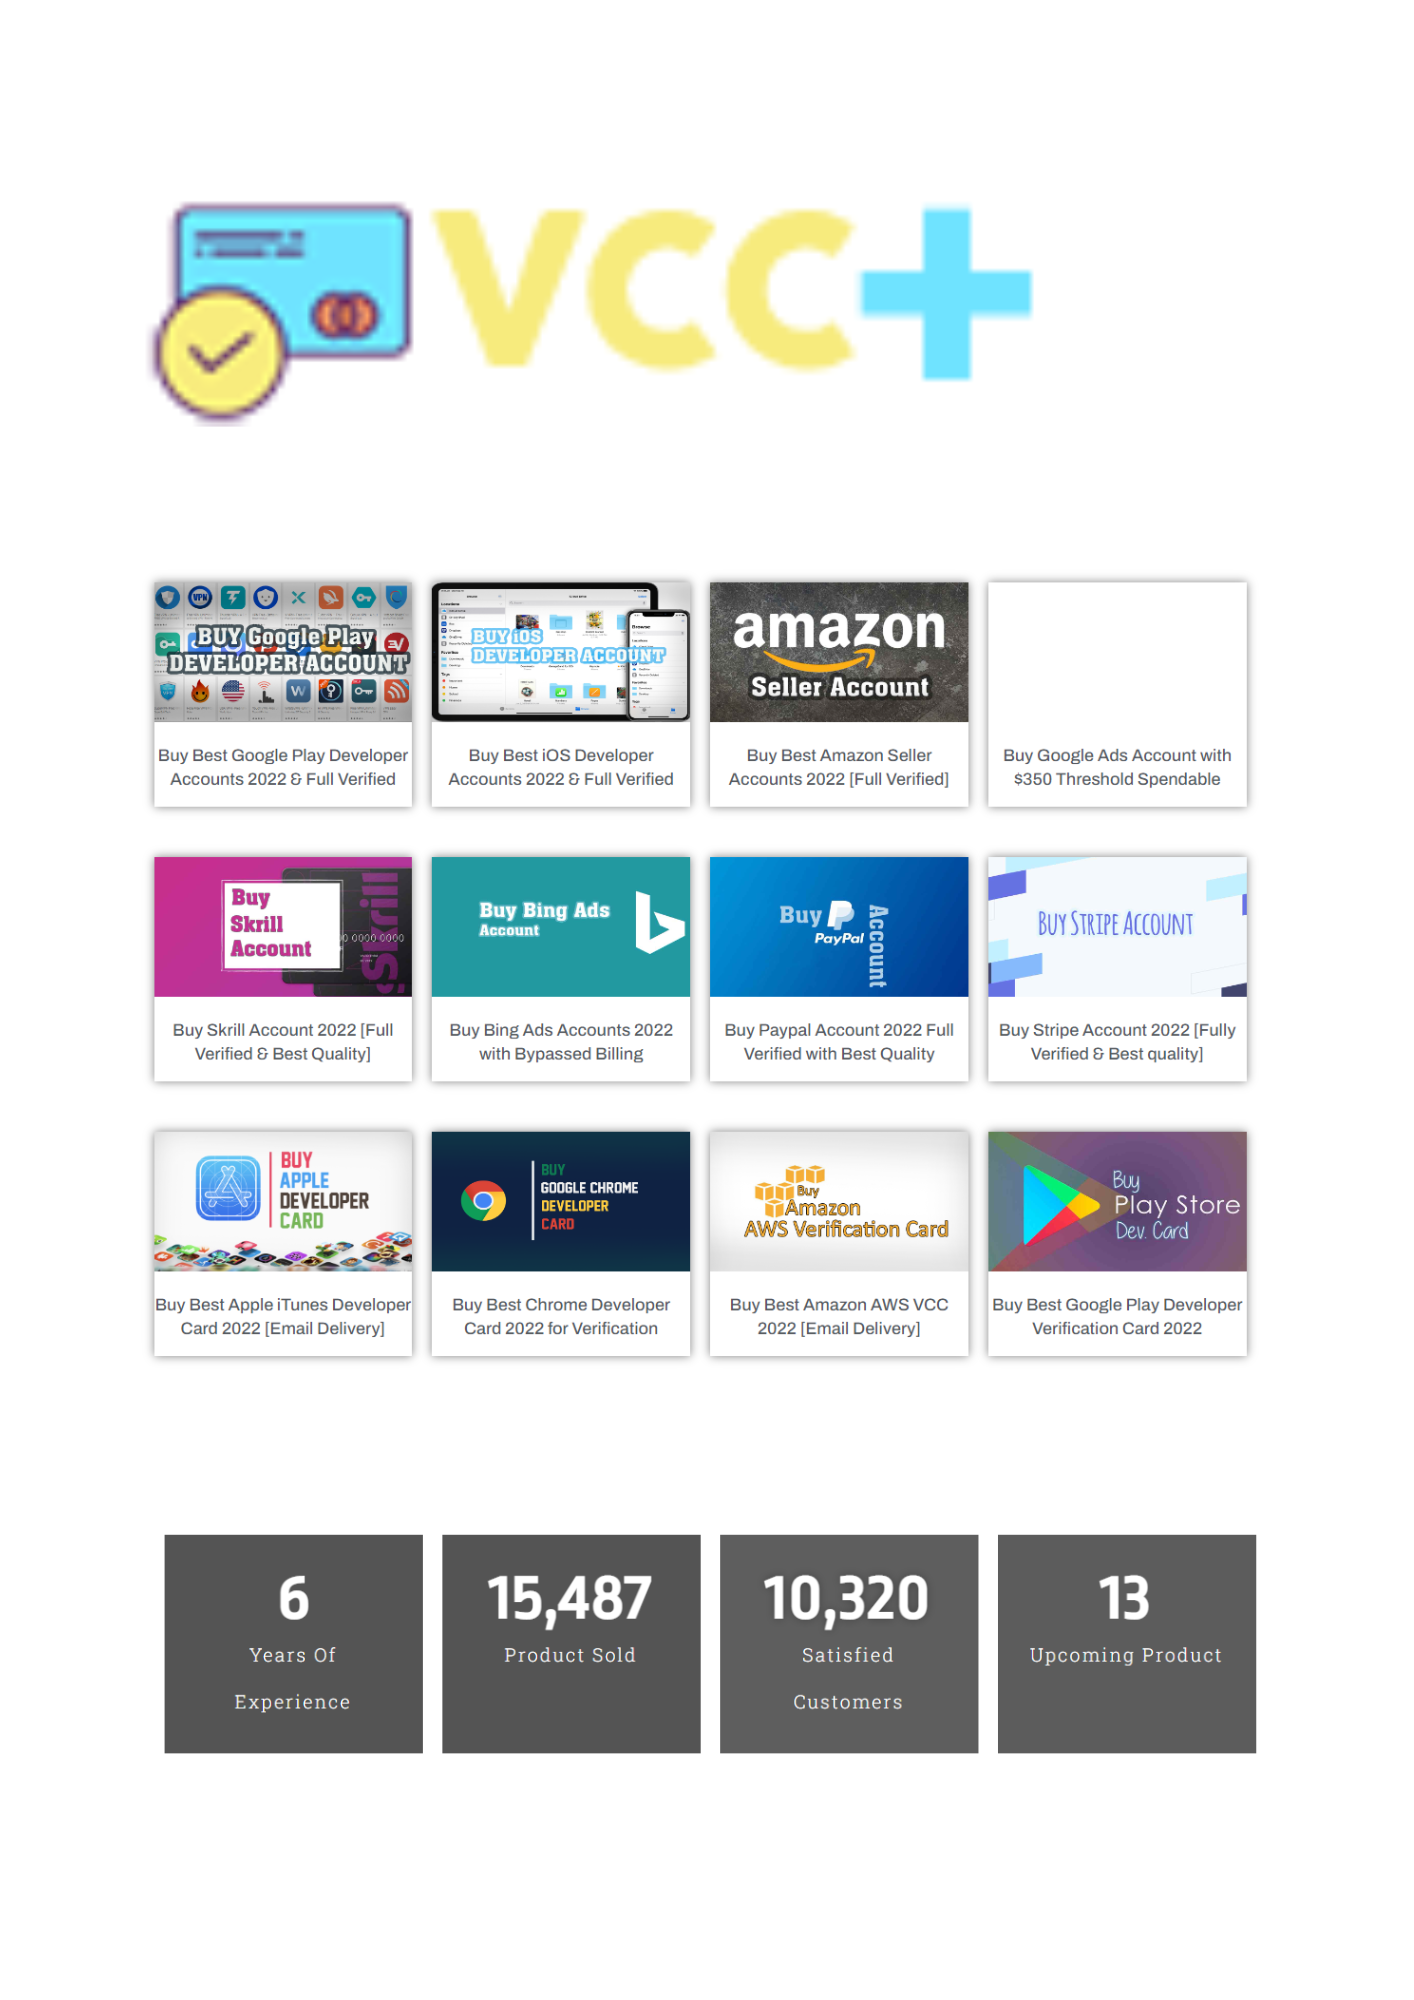 VCC+: Trusted one-stop online promotion & transaction solution provider